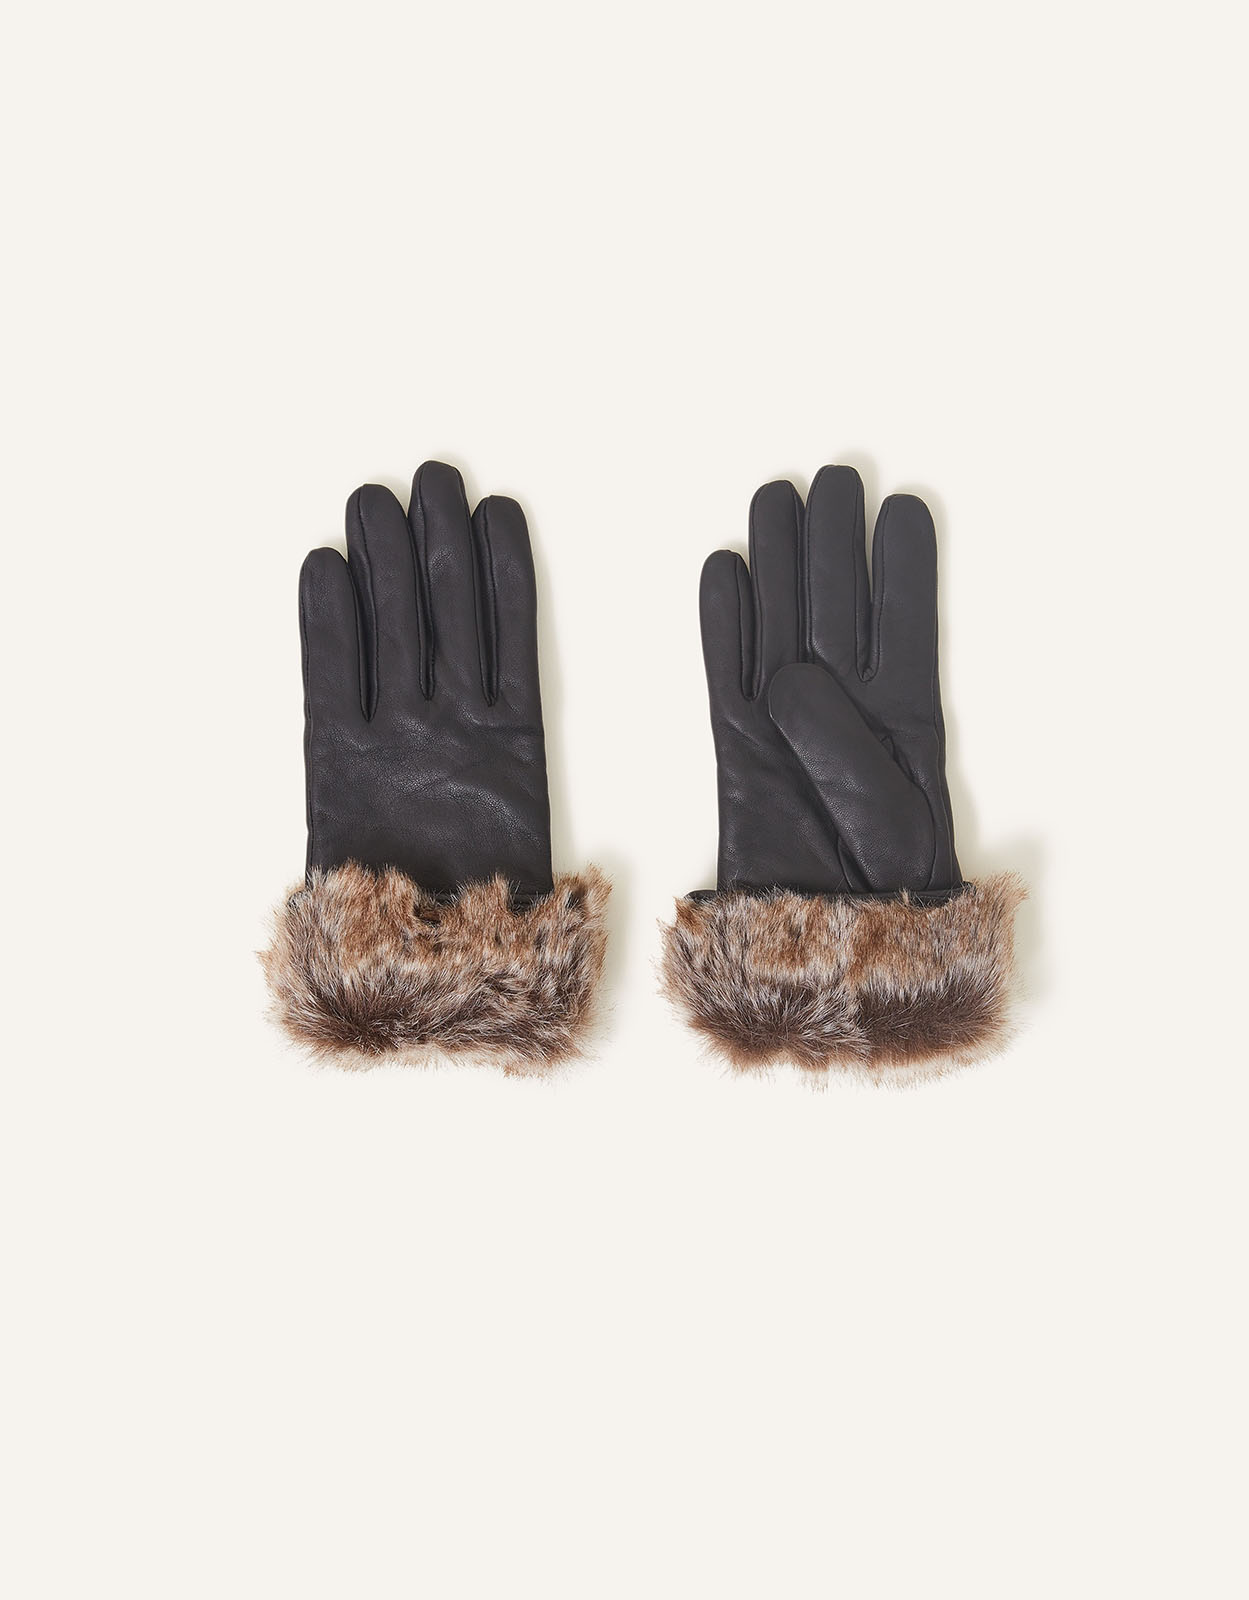 Accessorize Women's Black and Grey Leather Faux Fur Trim Gloves, Size: S / M